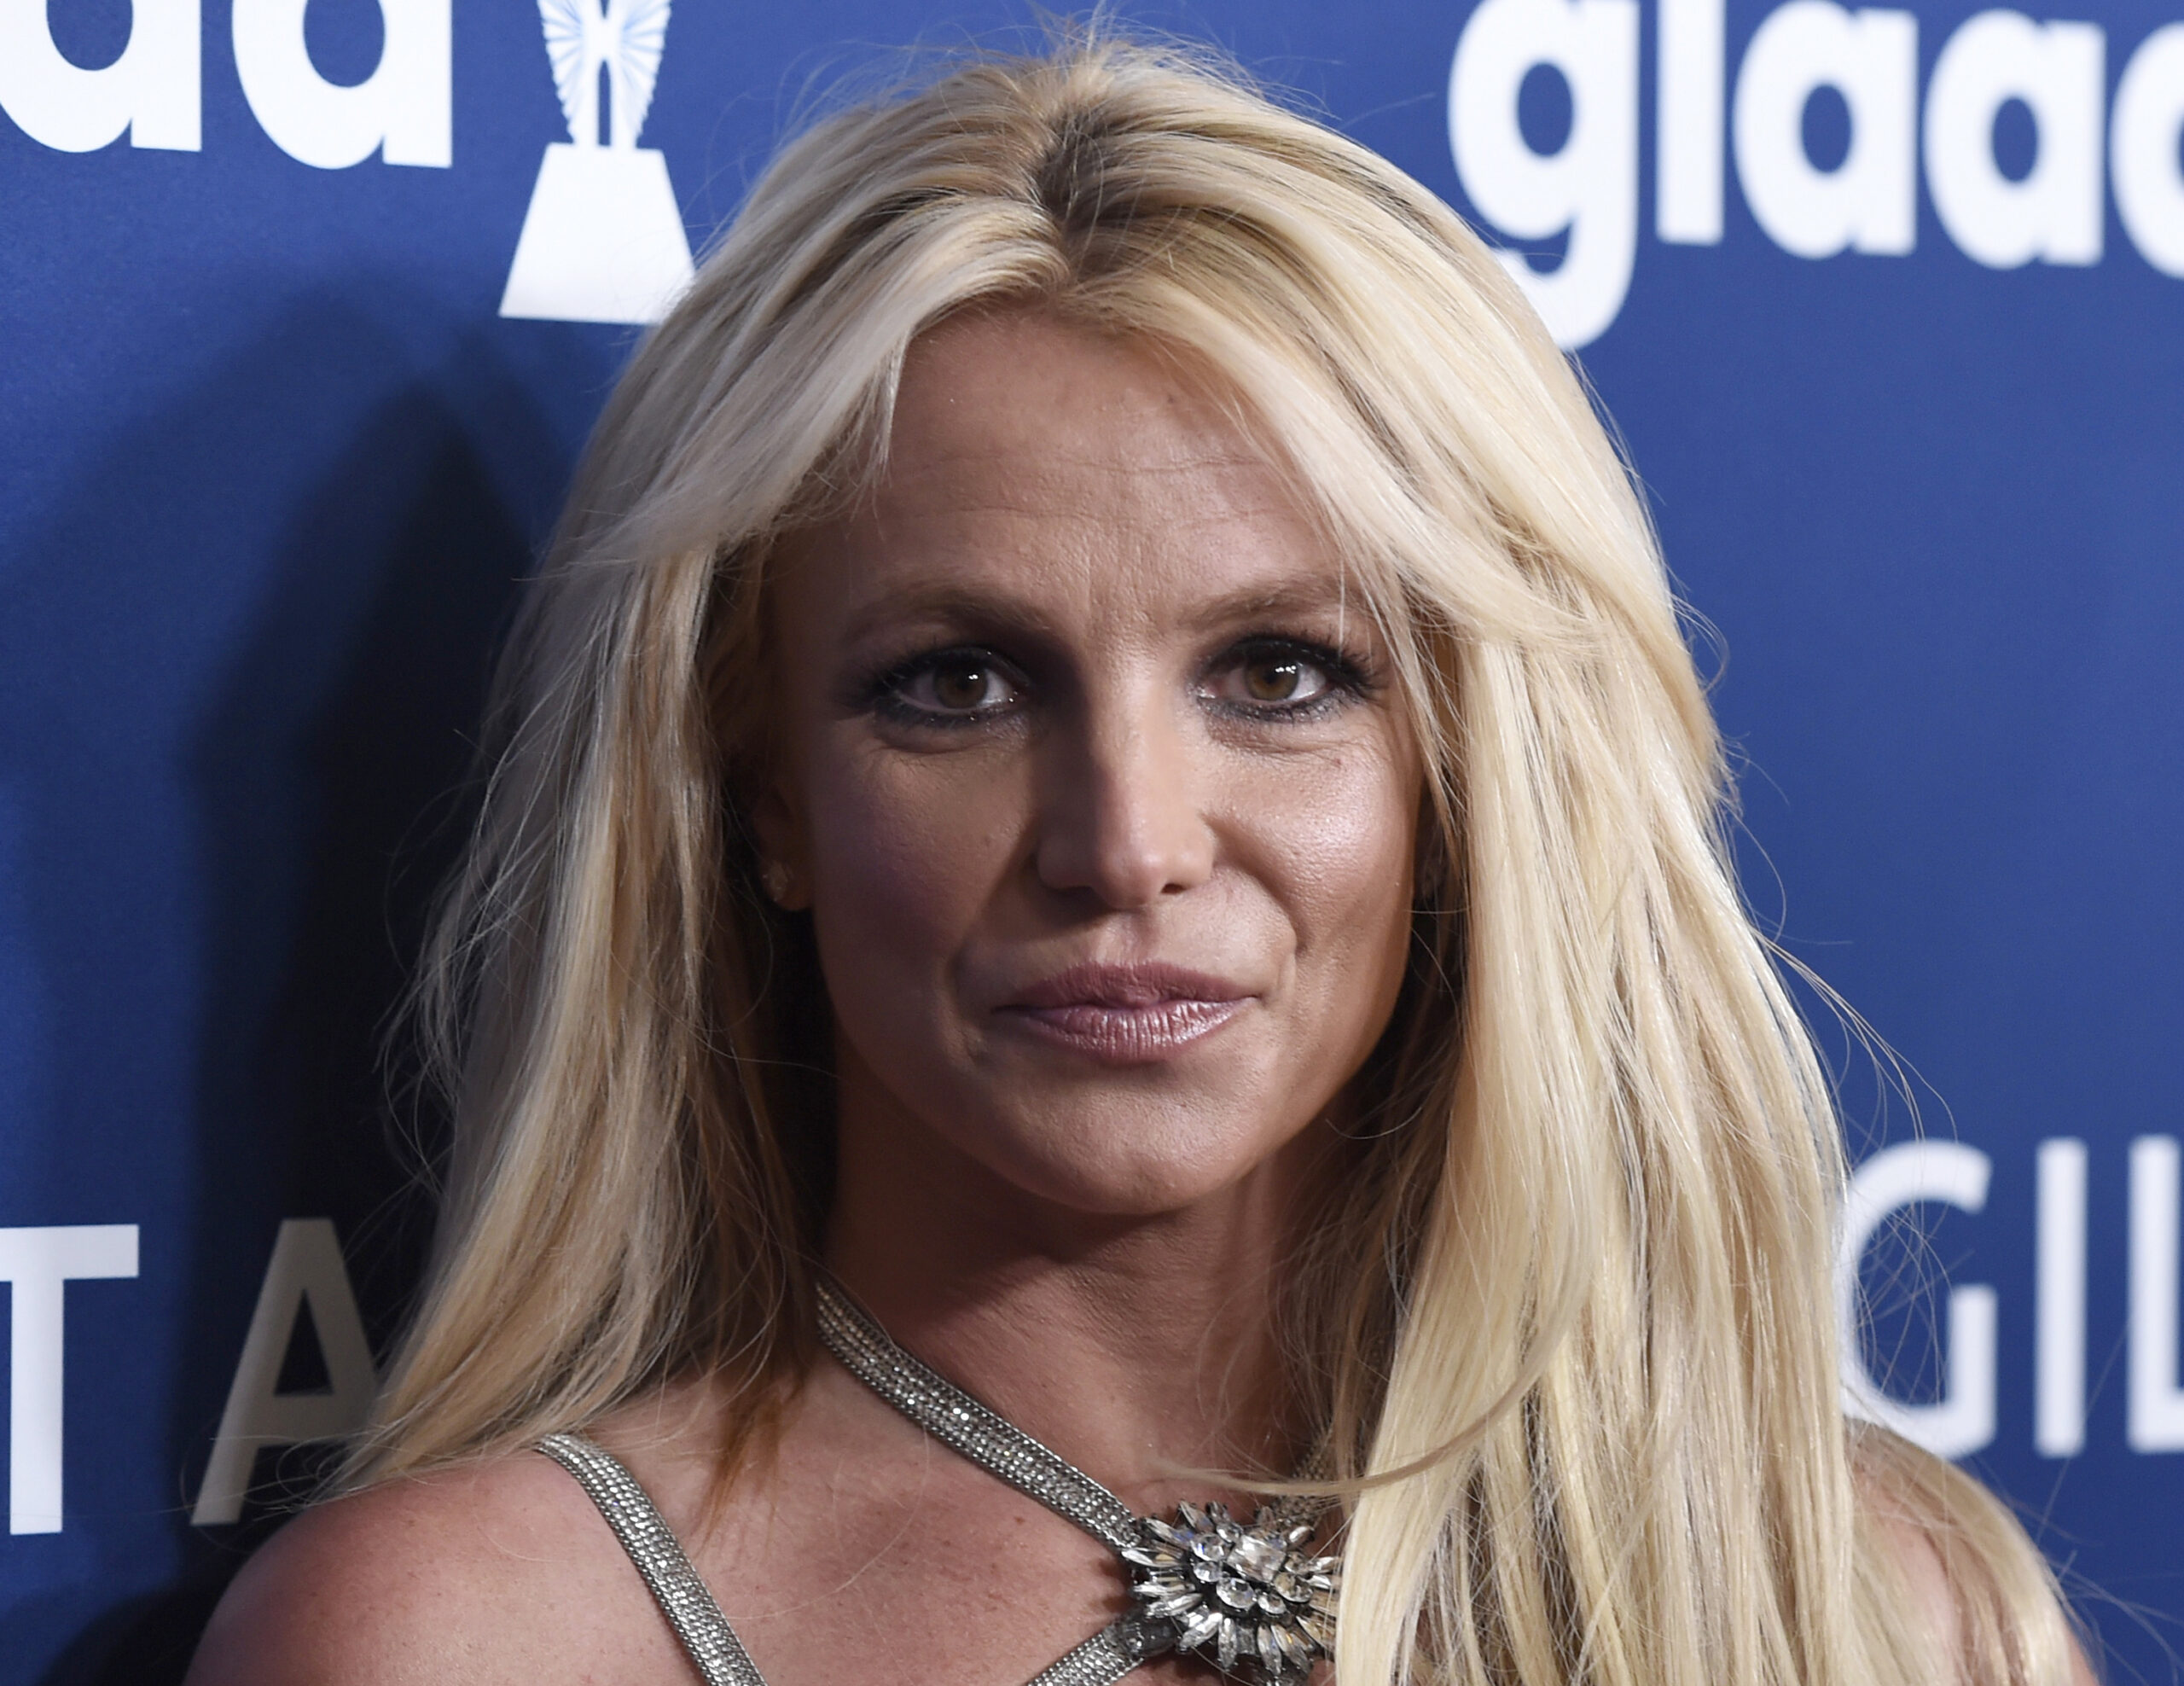 FILE - Britney Spears arrives at the 29th annual GLAAD Media Awards on April 12, 2018, in Beverly Hills, Calif. Authorities say they are investigating Spears for misdemeanor battery after a staff member at her home said the singer struck her. The Ventura County Sheriff's Office said Thursday, Aug. 19, 2021, that deputies responded to Spears home after the staff member reported the Monday night dispute. (Photo by Chris Pizzello/Invision/AP, File)